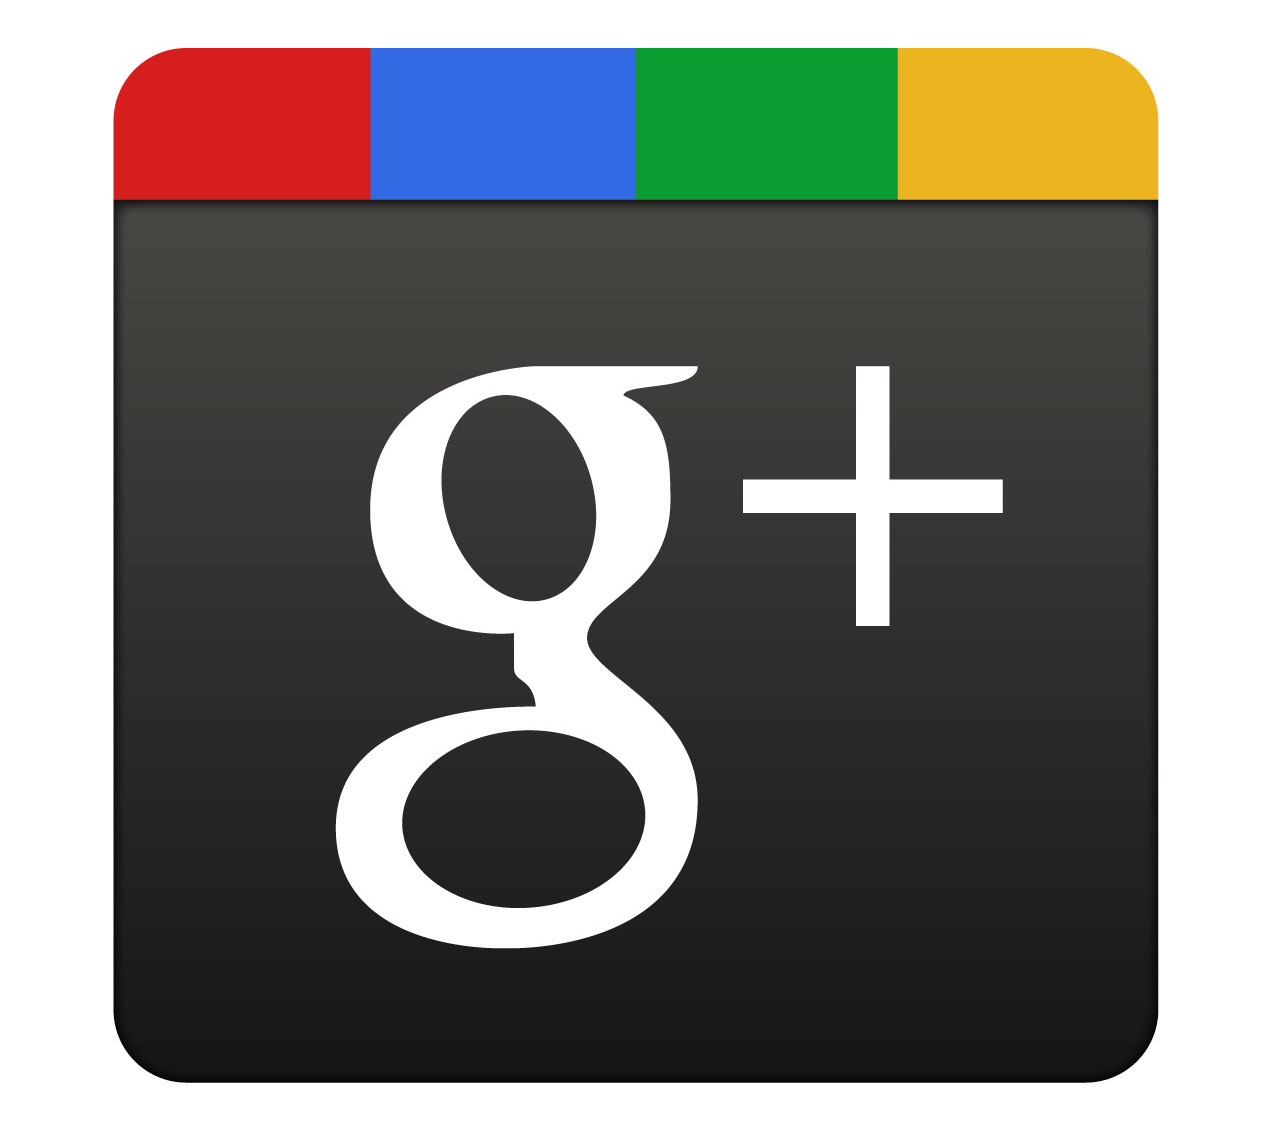 What is Google Plus